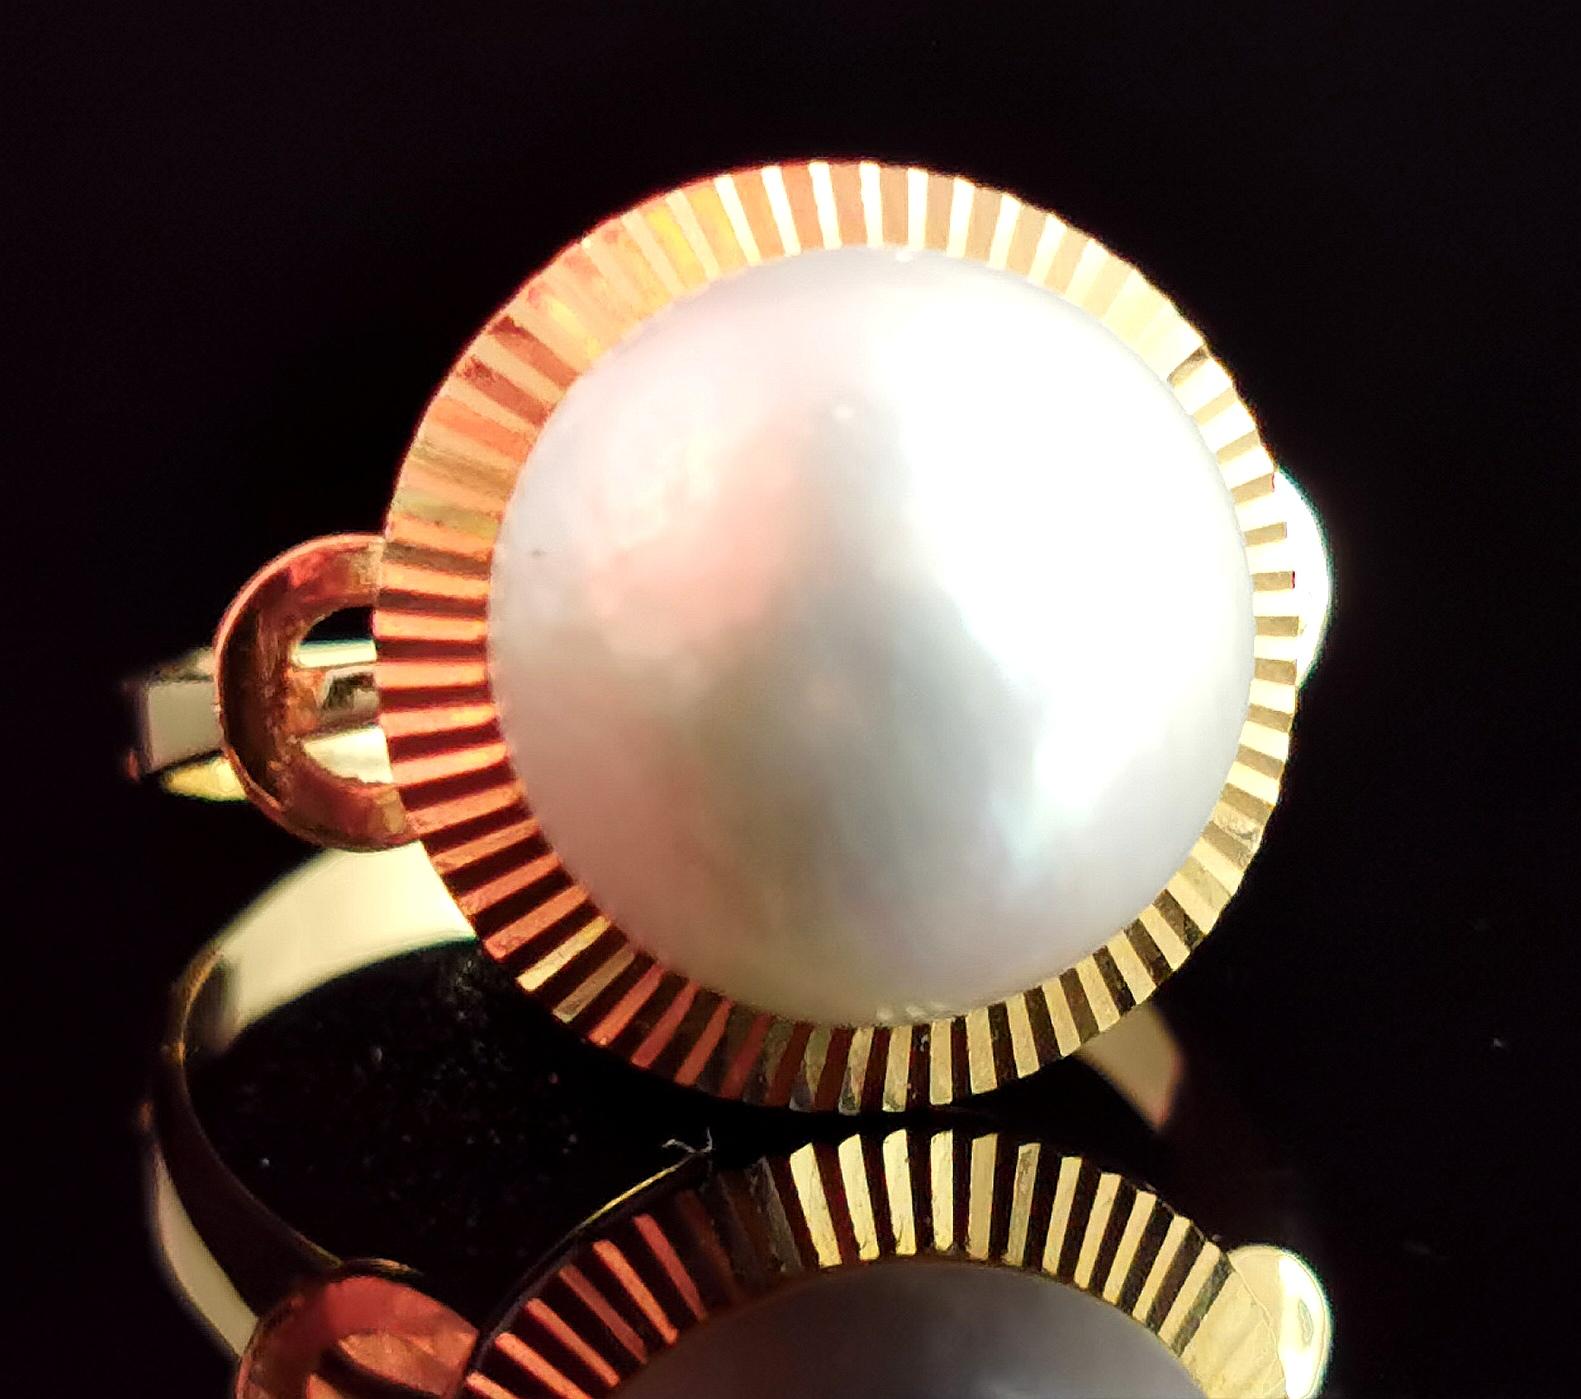 A gorgeous huge Vintage Mabe pearl cocktail or dress ring in rich 14kt yellow gold.

A large creamy white Mabe pearl with a cool lustre set into a large 14kt yellow gold engraved bezel setting that looks almost like the suns rays.

It has a smooth